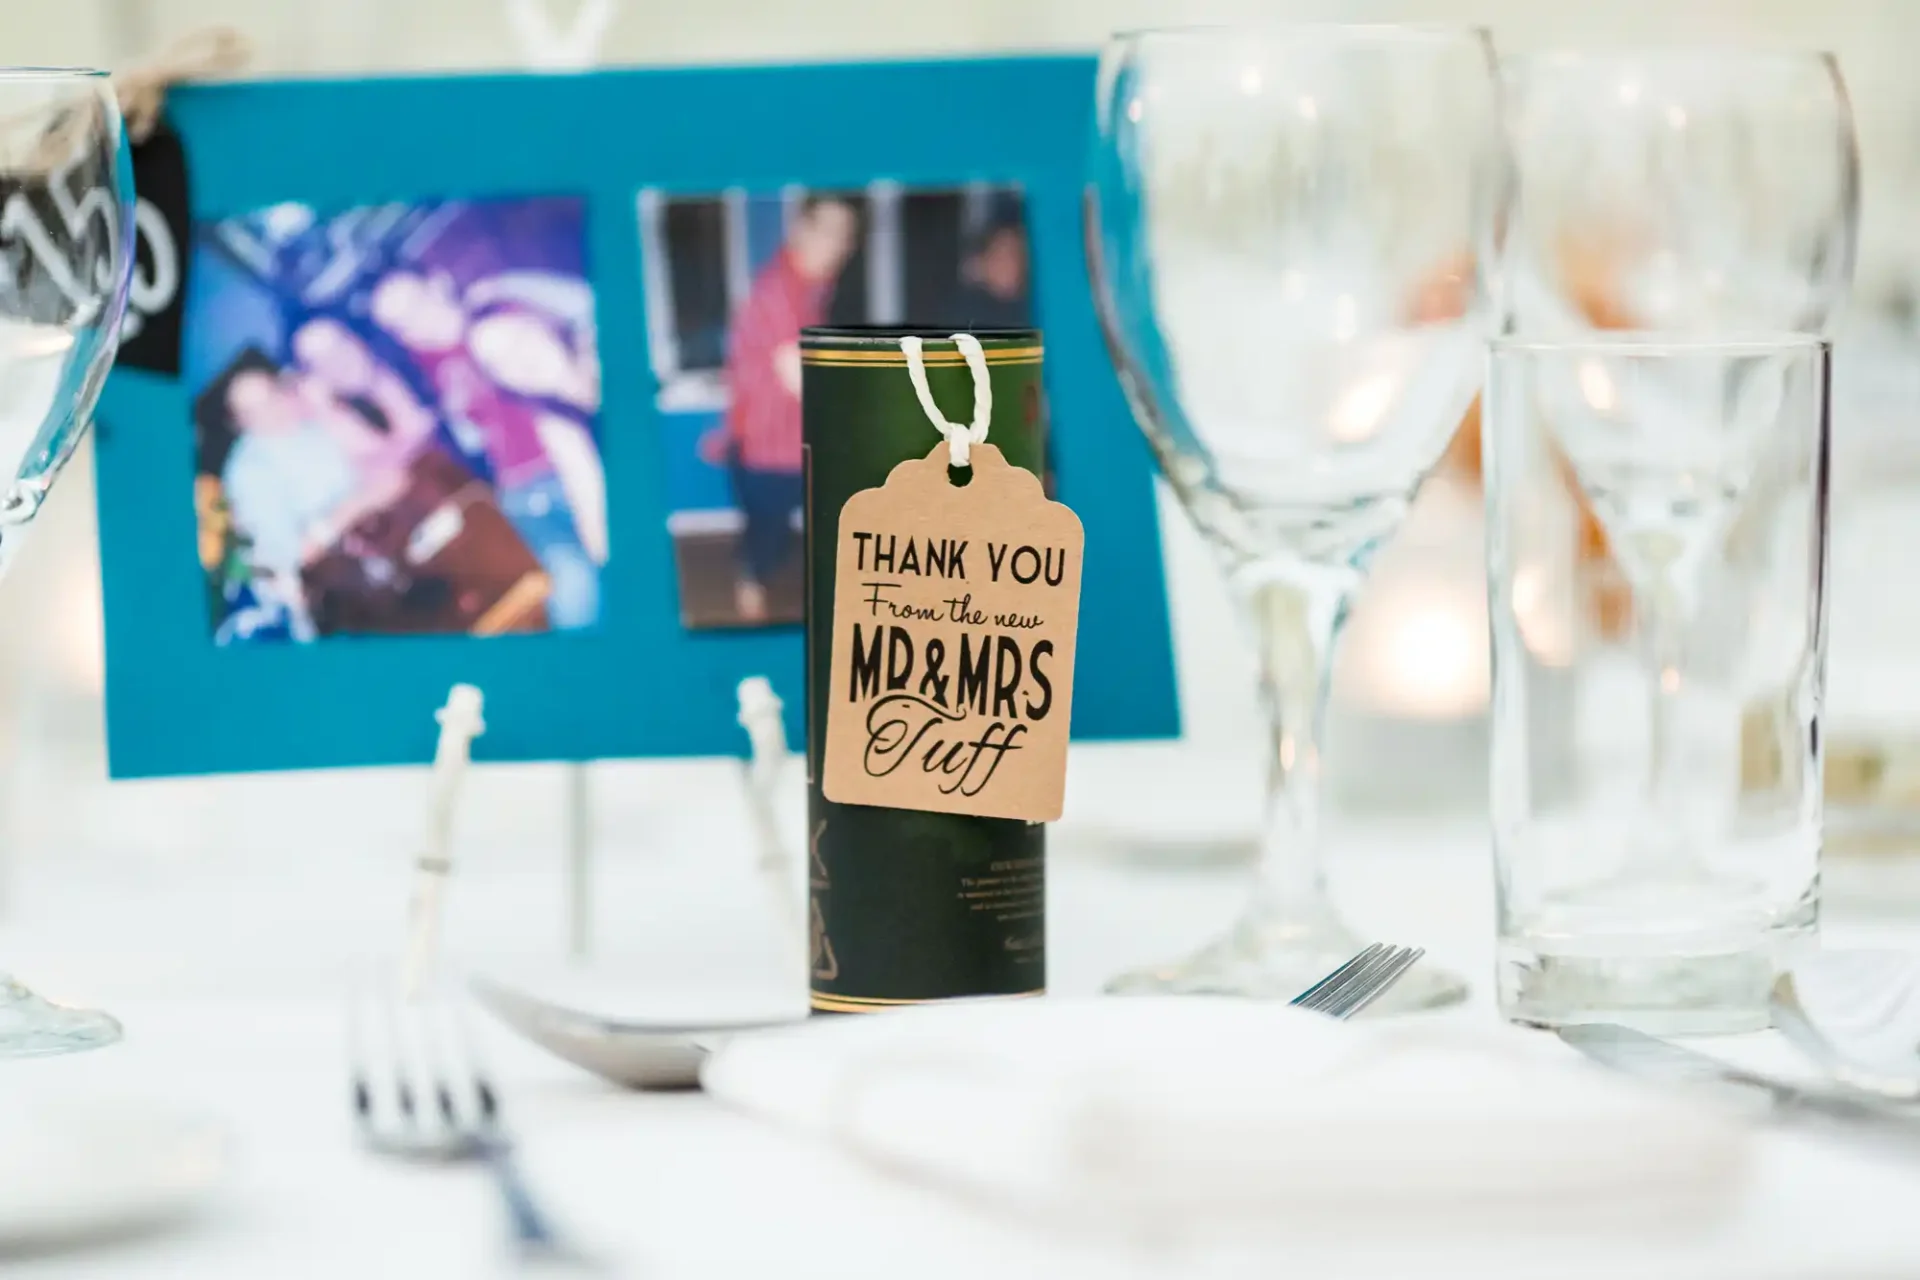 A thank you card rests on a decorated table amidst wine glasses and cutlery with a blurred photo in the background.